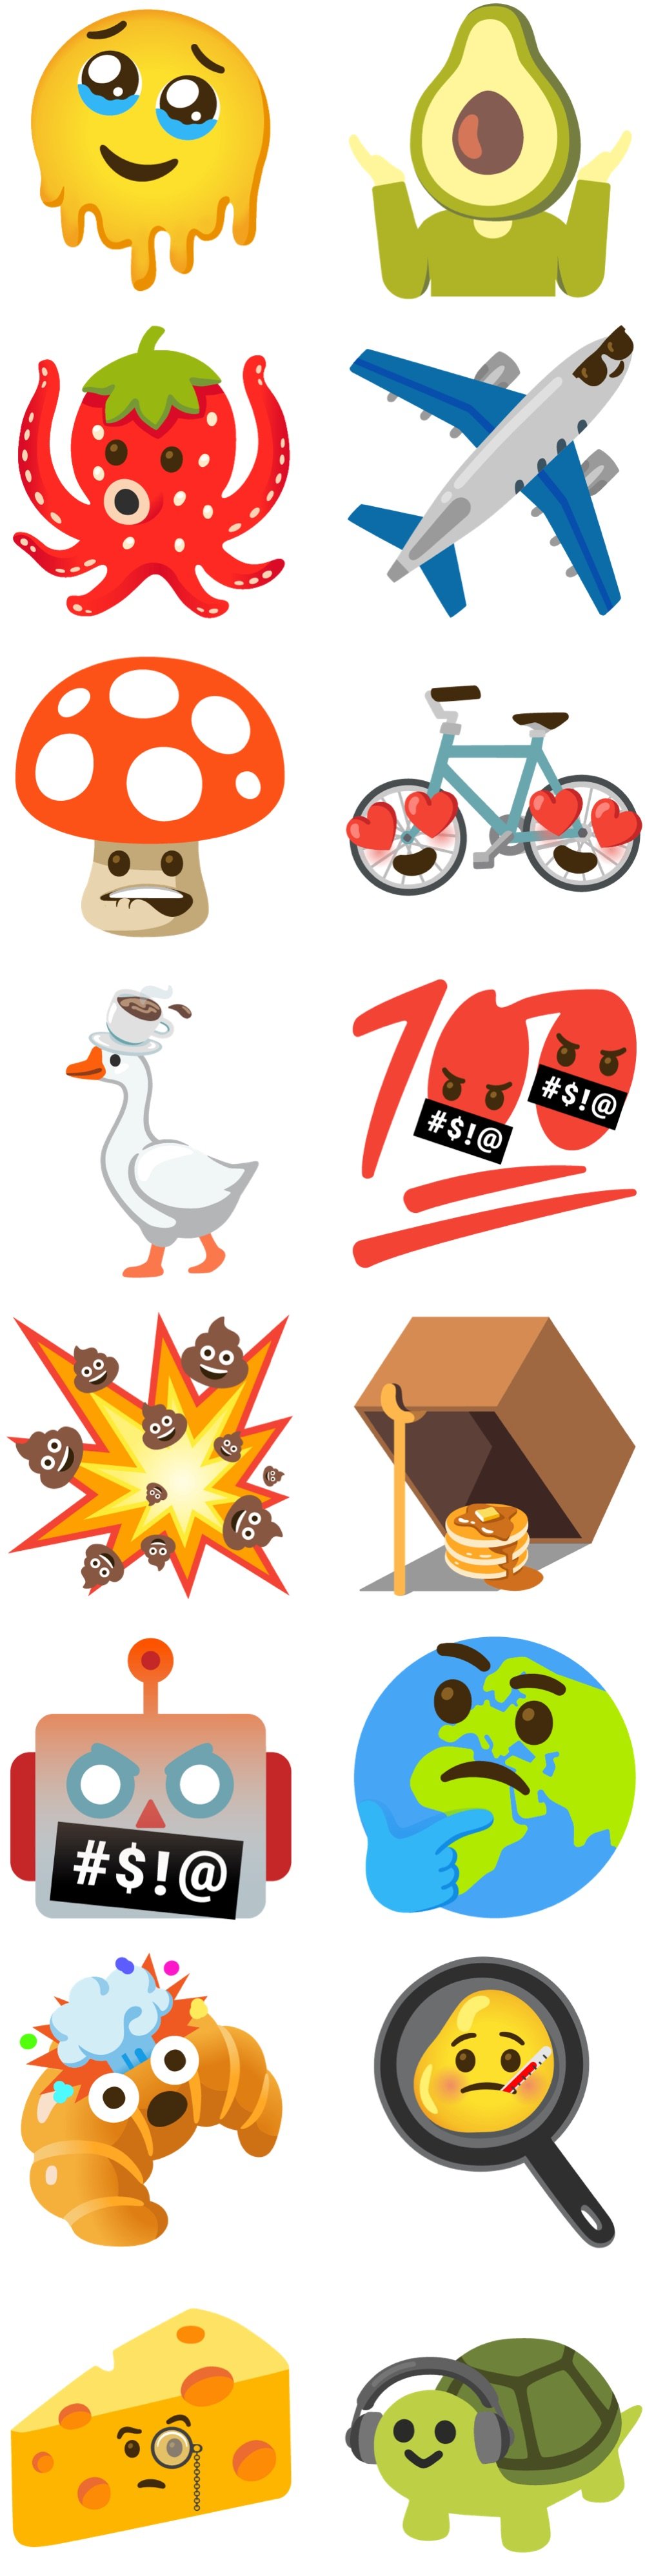 a variety of emojis created from exisitng emojis